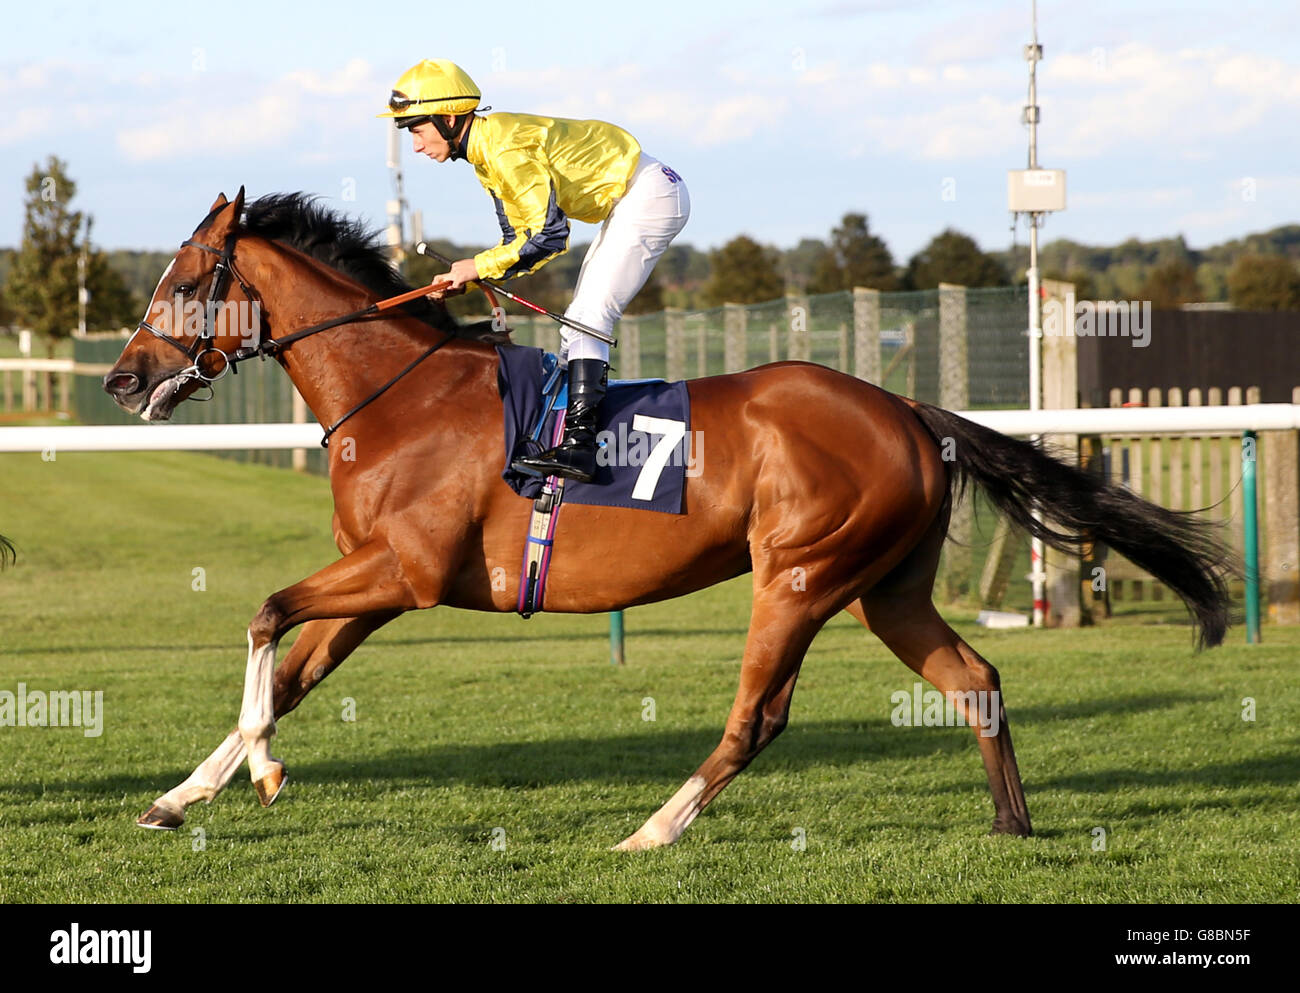 Horse Racing - The Cambridgeshire Meeting - Day One - Newmarket Racecourse. Bold Prediction ridden by jockey Antonio Fresu goes to post during day one of The Cambridgeshire Meeting at Newmarket Racecourse. Stock Photo